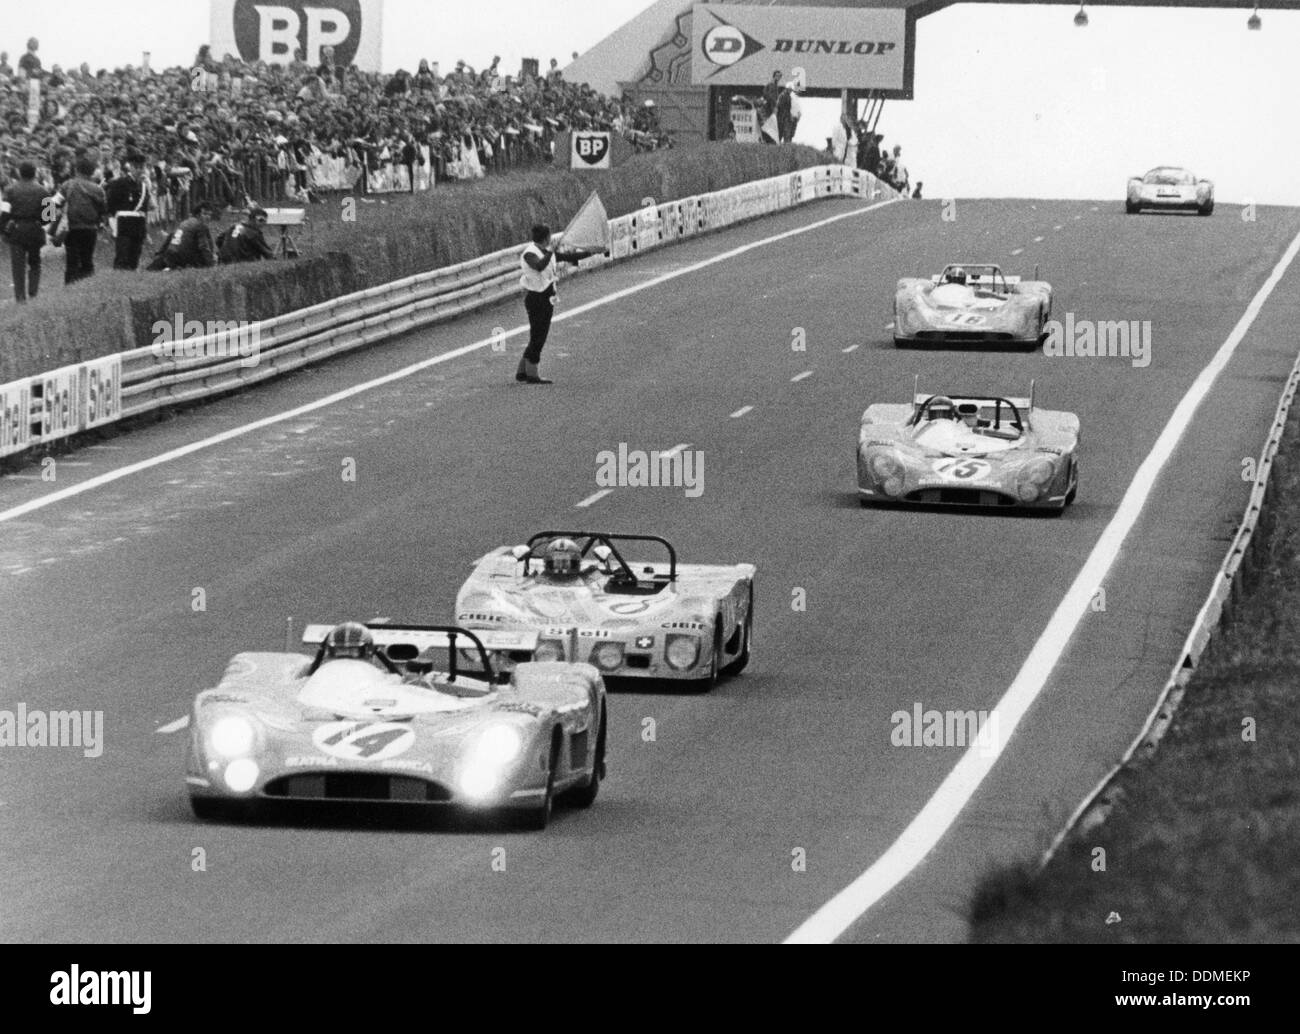 Matra-Simca 670 leading a Lola T280, Le Mans, France, 1972. Artist: Unknown Stock Photo